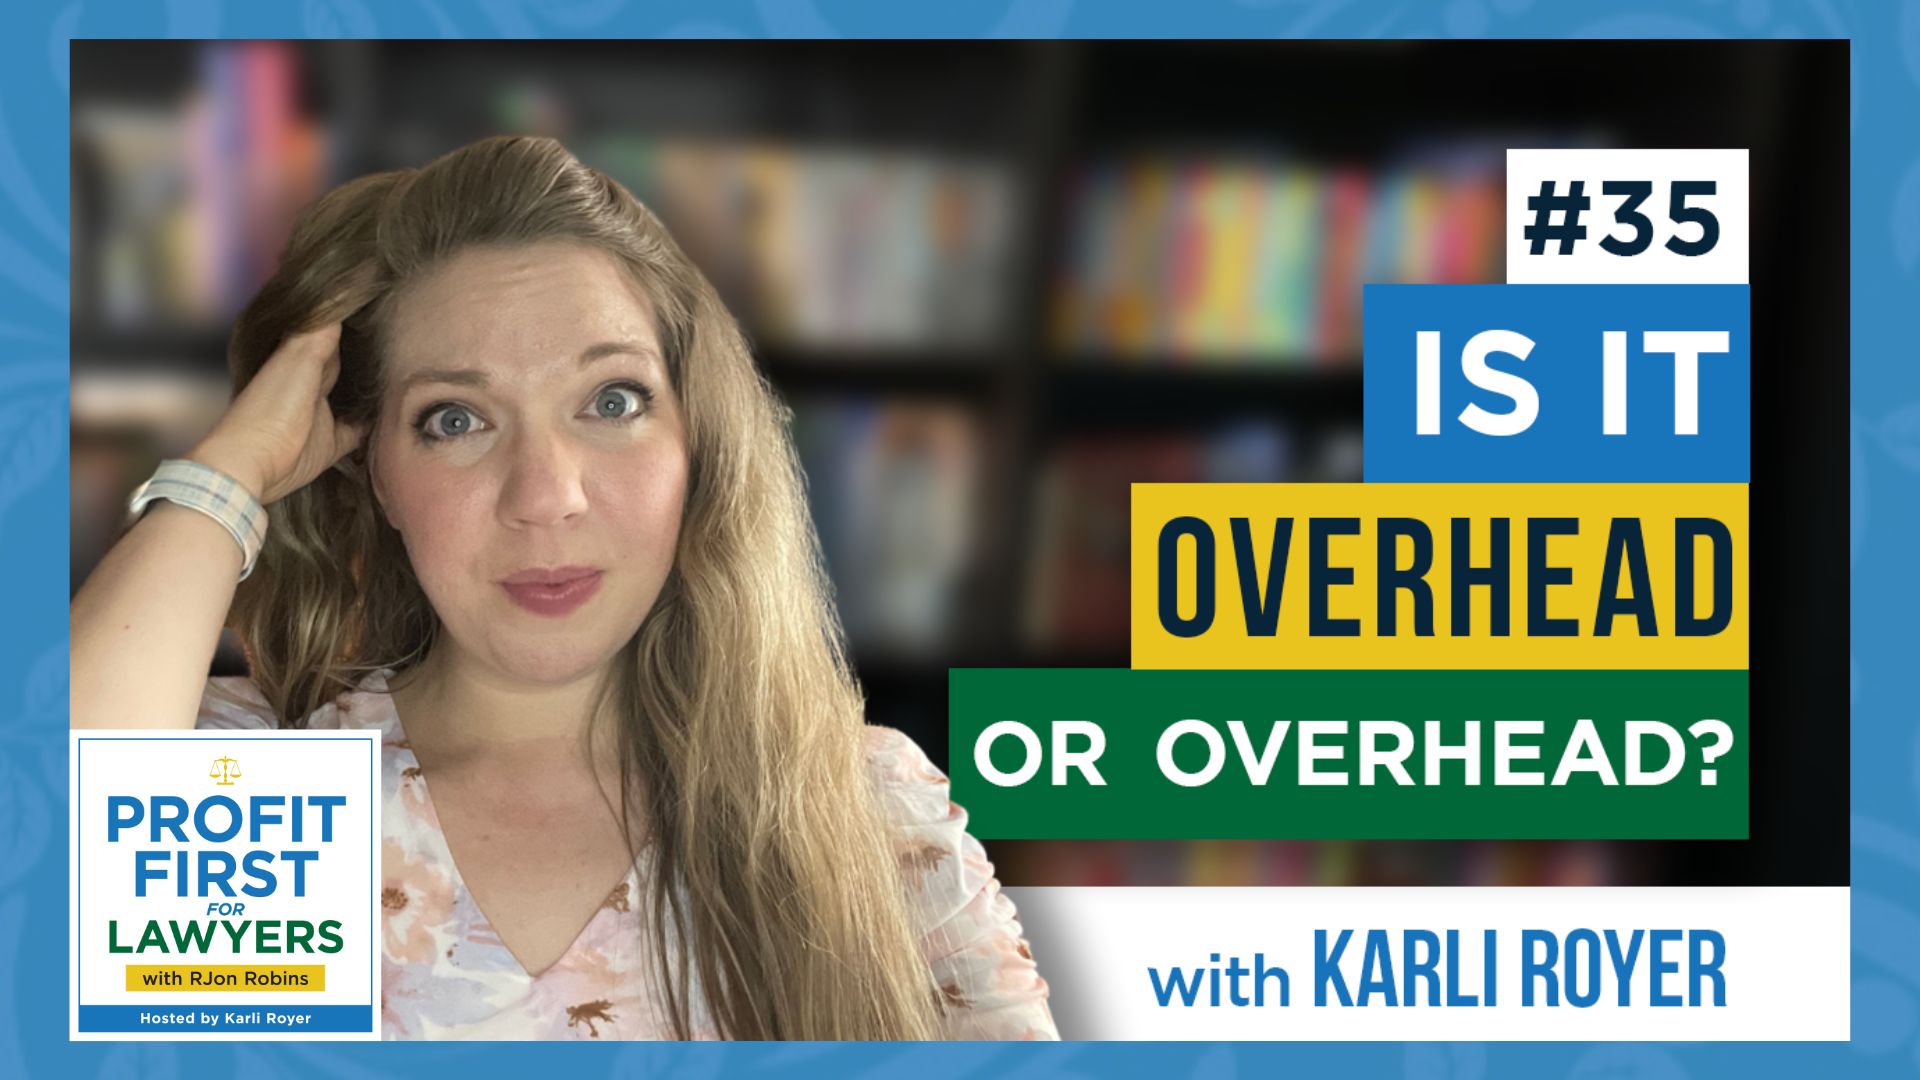 Episode 35 Is It Overhead Or Overhead? featured image with host Karly Royer looking perplexed.